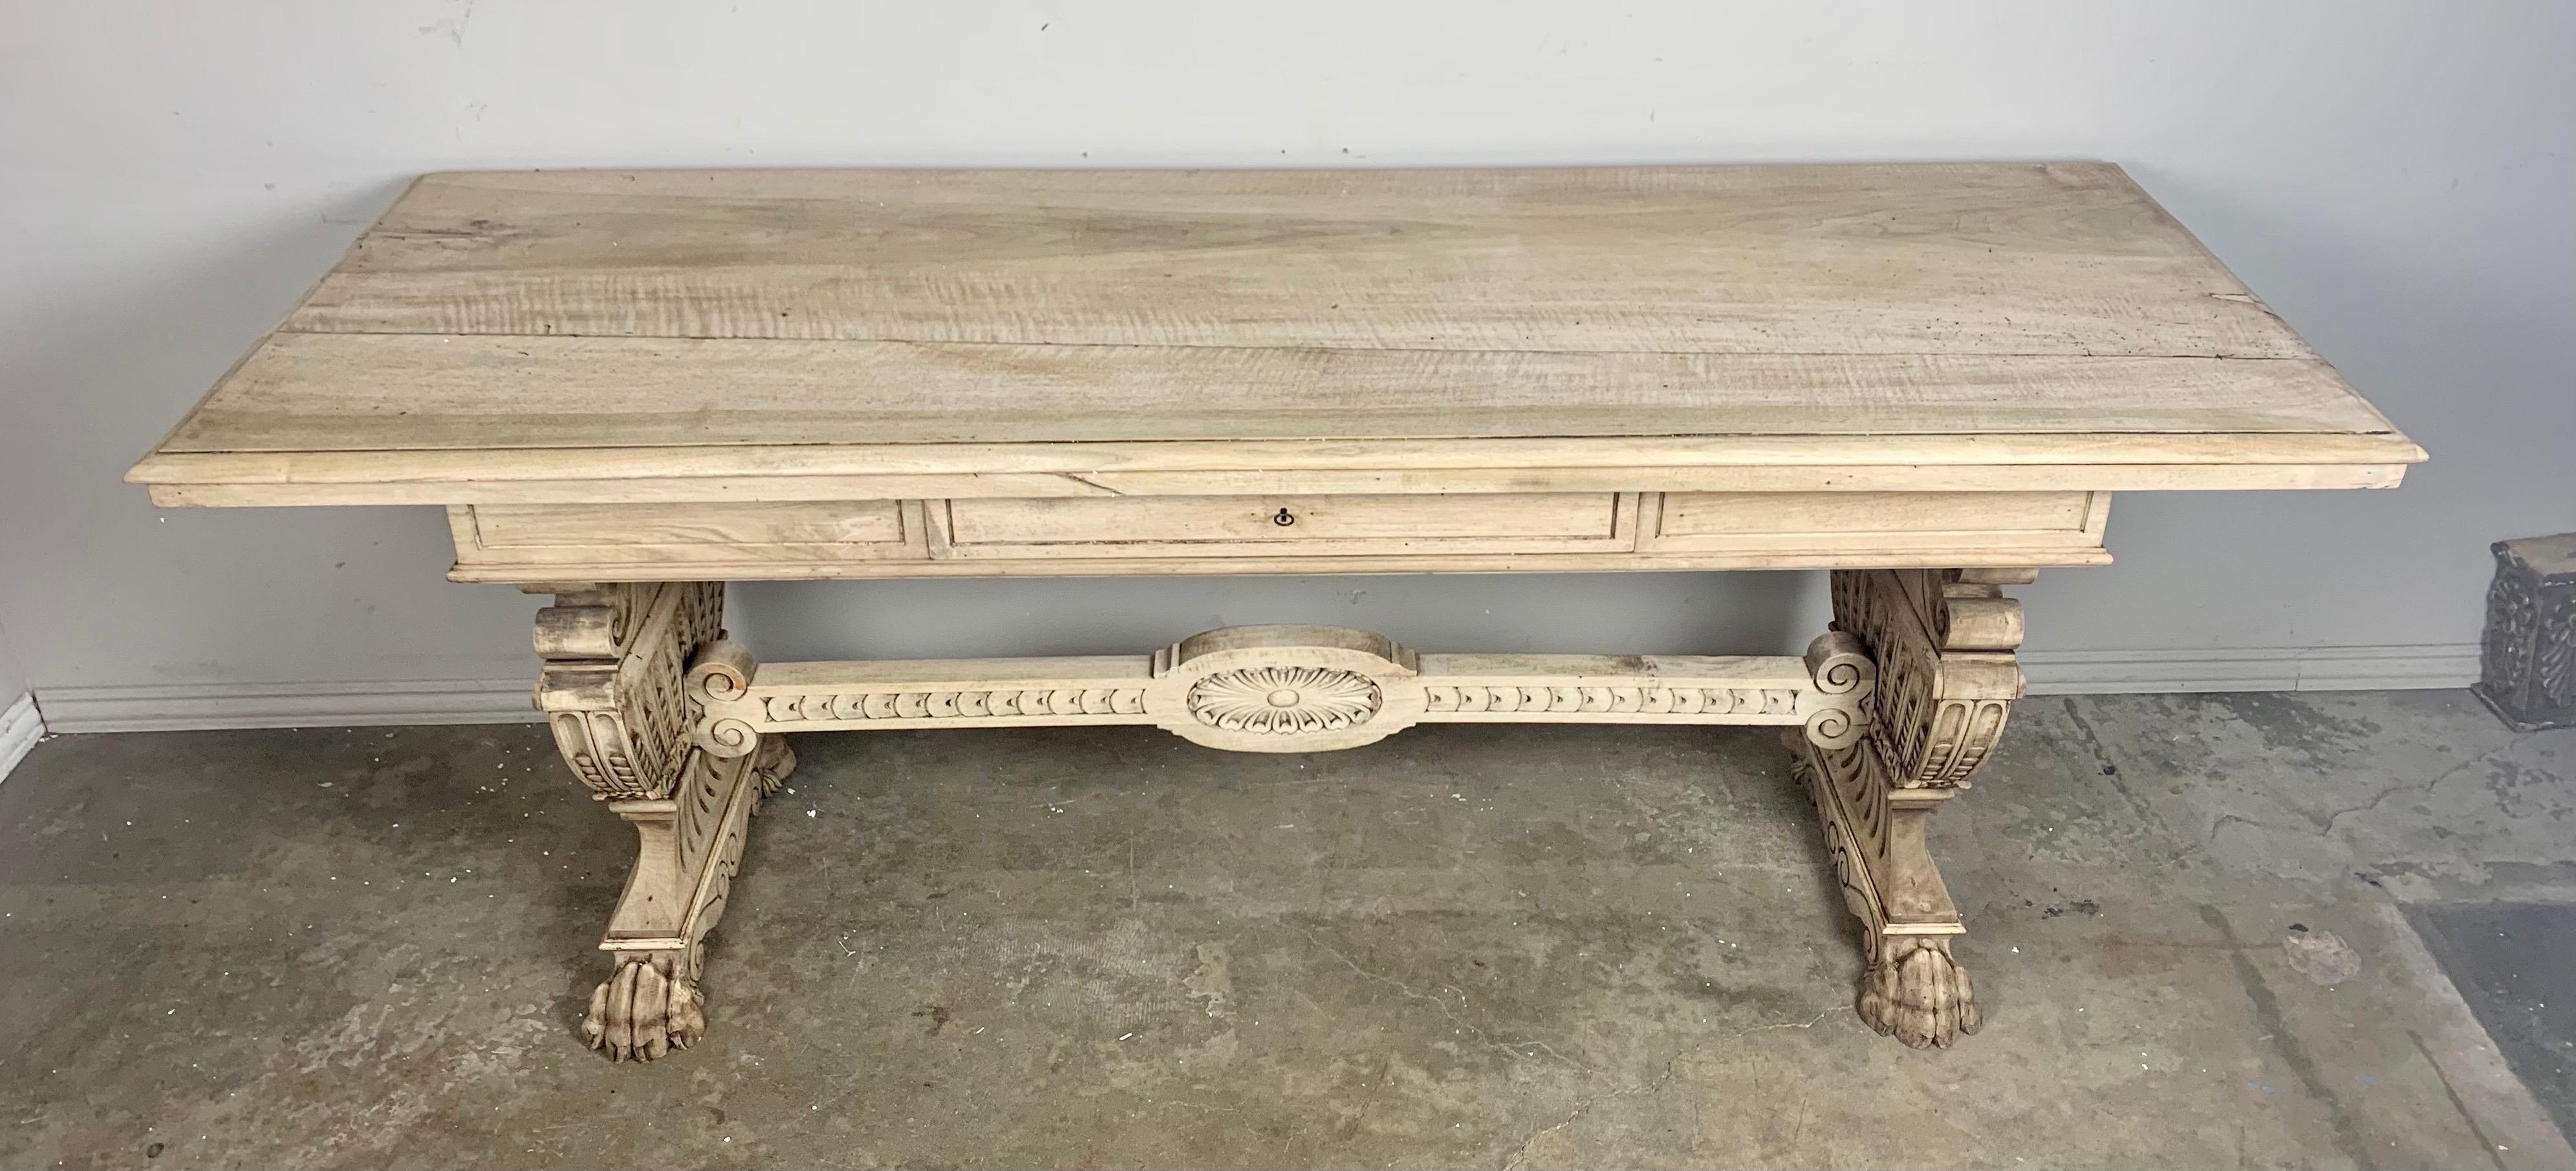 19th century bleached walnut trestle style table with two pedestals connected by a center stretcher. Single drawer for storage. The highly carved urn shaped pedestals are supported by carved wood lion feet. The center stretcher is also finely carved